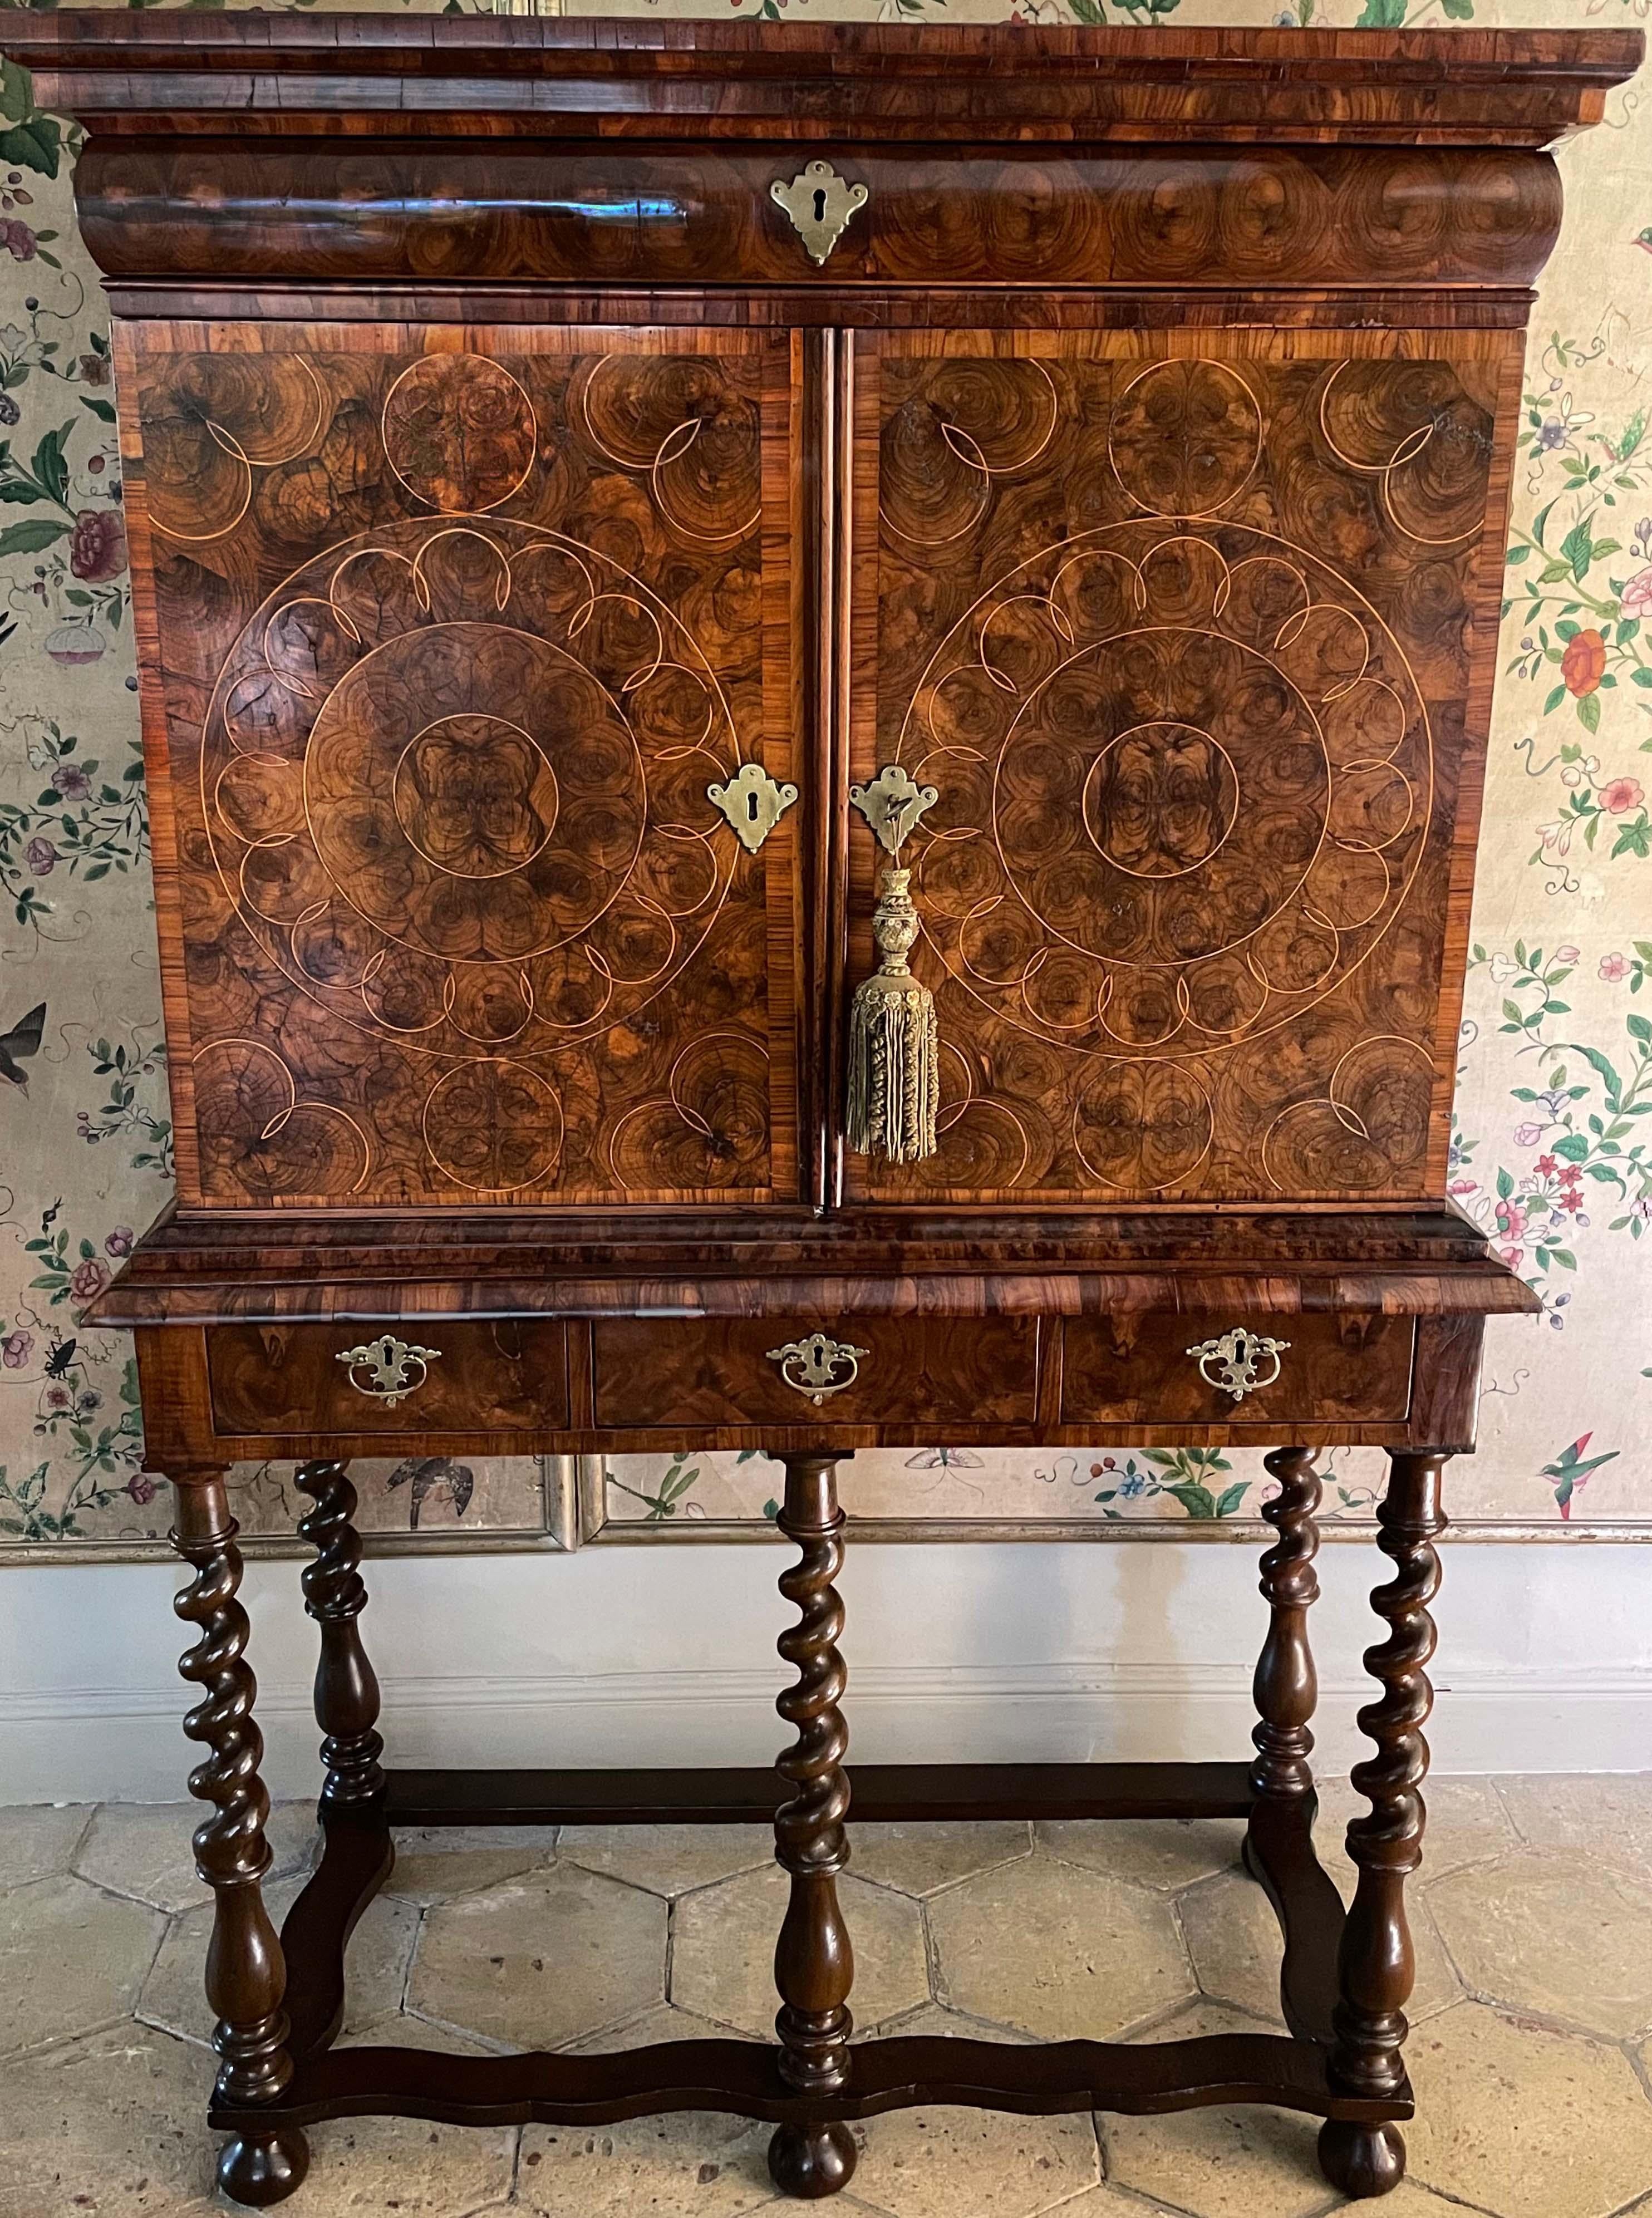 William & Mary period oyster olive wood cabinet on stand of unusually small size. Ca 1685.

The oyster inlays are of superb quality, and it is rare to find one of such small proportions. The two cabinet doors open to reveal numerous small drawers